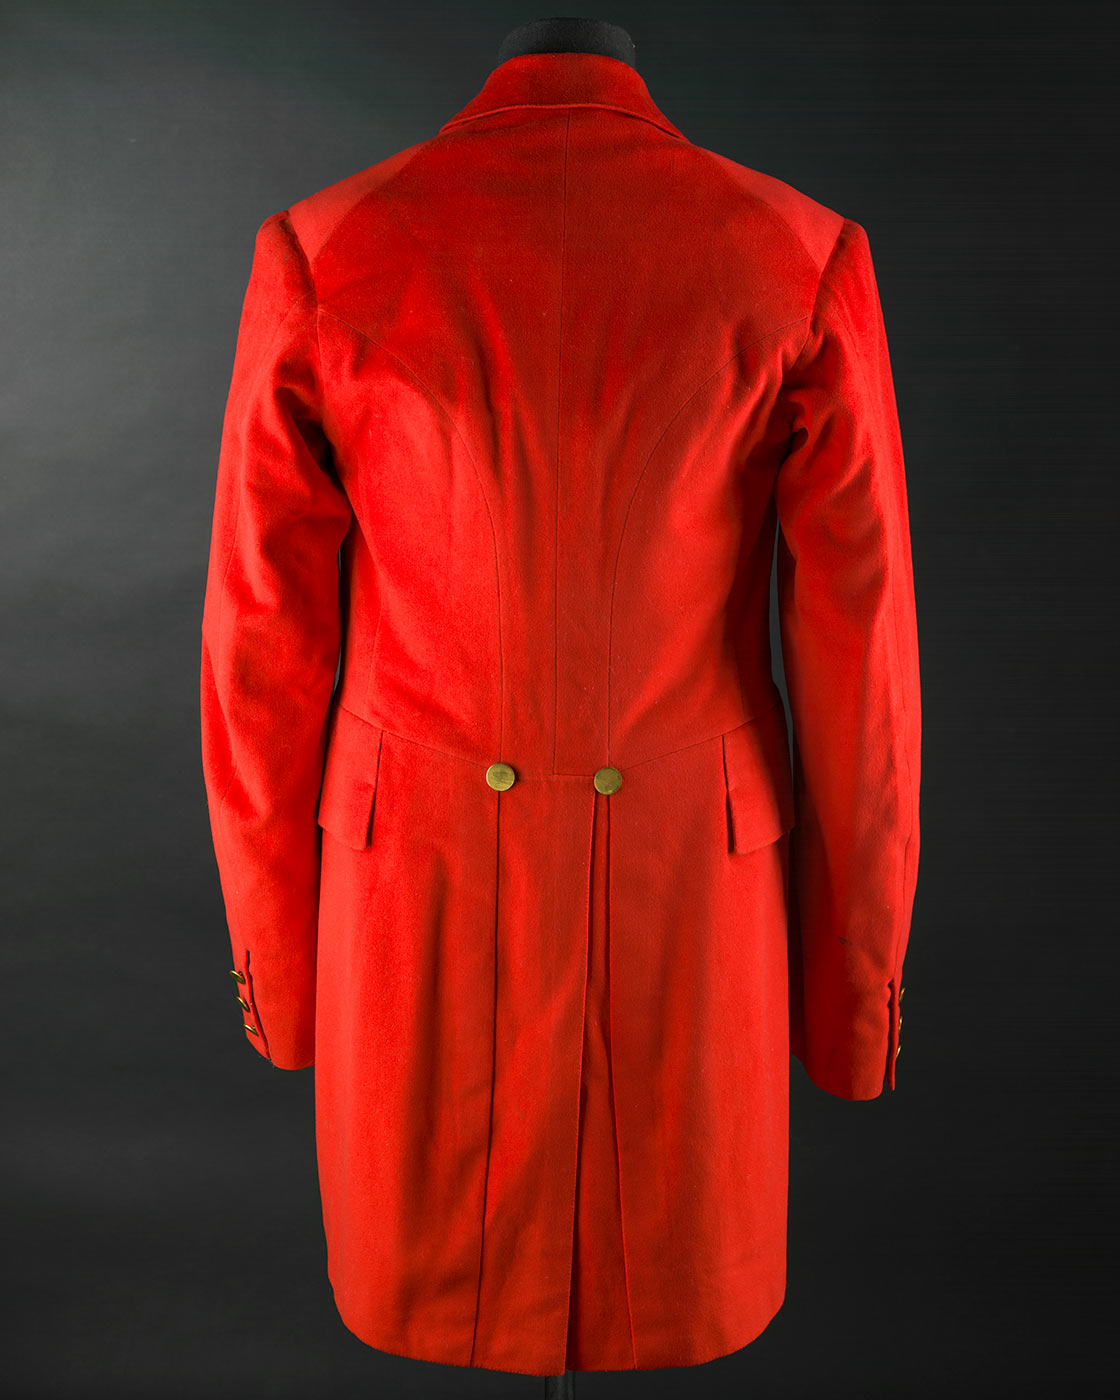 A red wool cut away jacket with tails otherwise known as hunting pinks. It has 3 brass shank buttons at front opening and 3 buttons on each cuff. It is fully lined in red cotton. The sleeves are lined in white cotton with blue stripe. The jacket has machine quilted underarm lining and a back vent with 2 brass buttons at top. It has four pockets on front with flaps. - click to view larger image